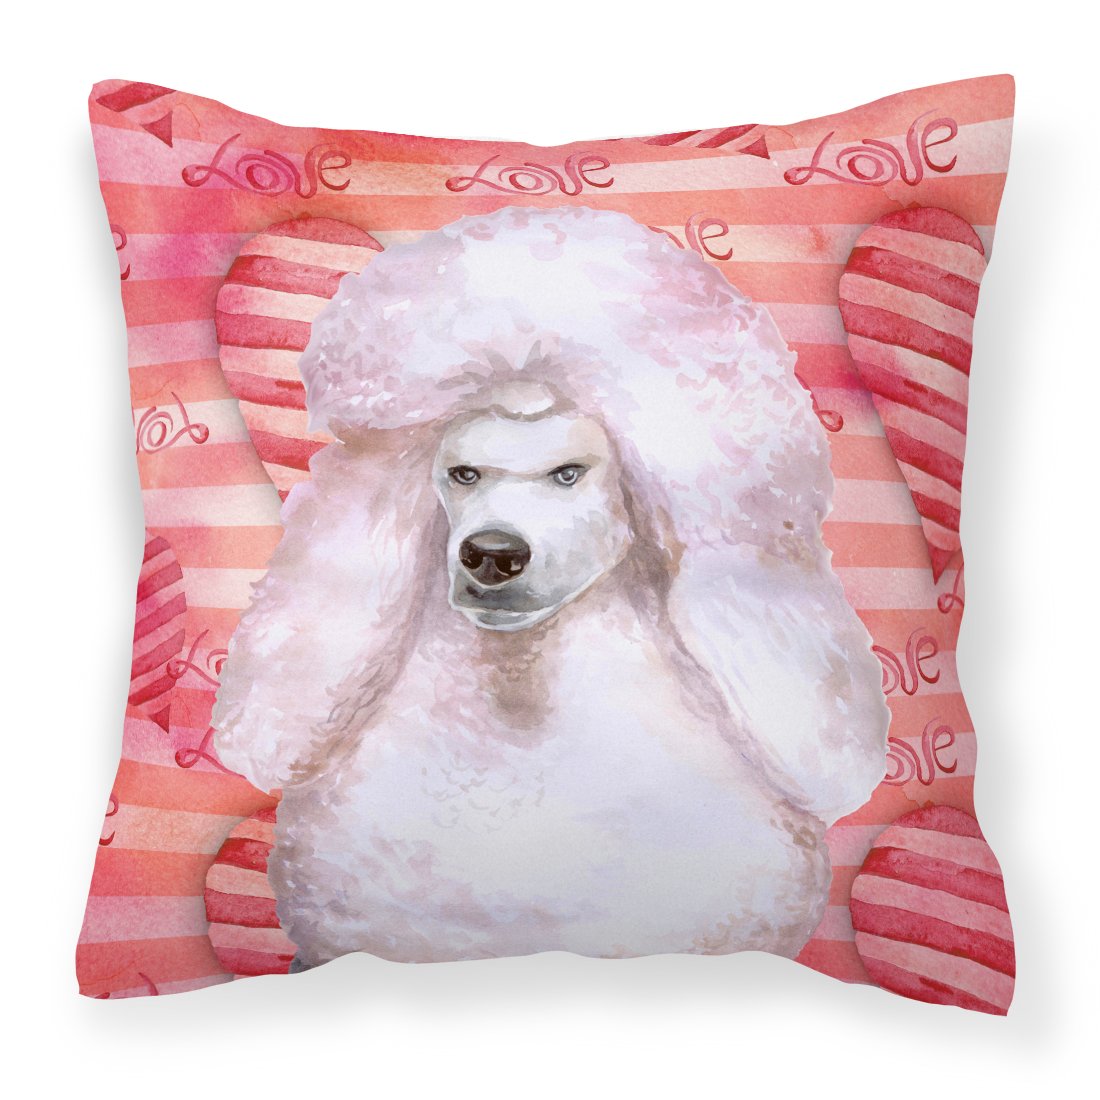 White Standard Poodle Love Fabric Decorative Pillow BB9804PW1818 by Caroline's Treasures